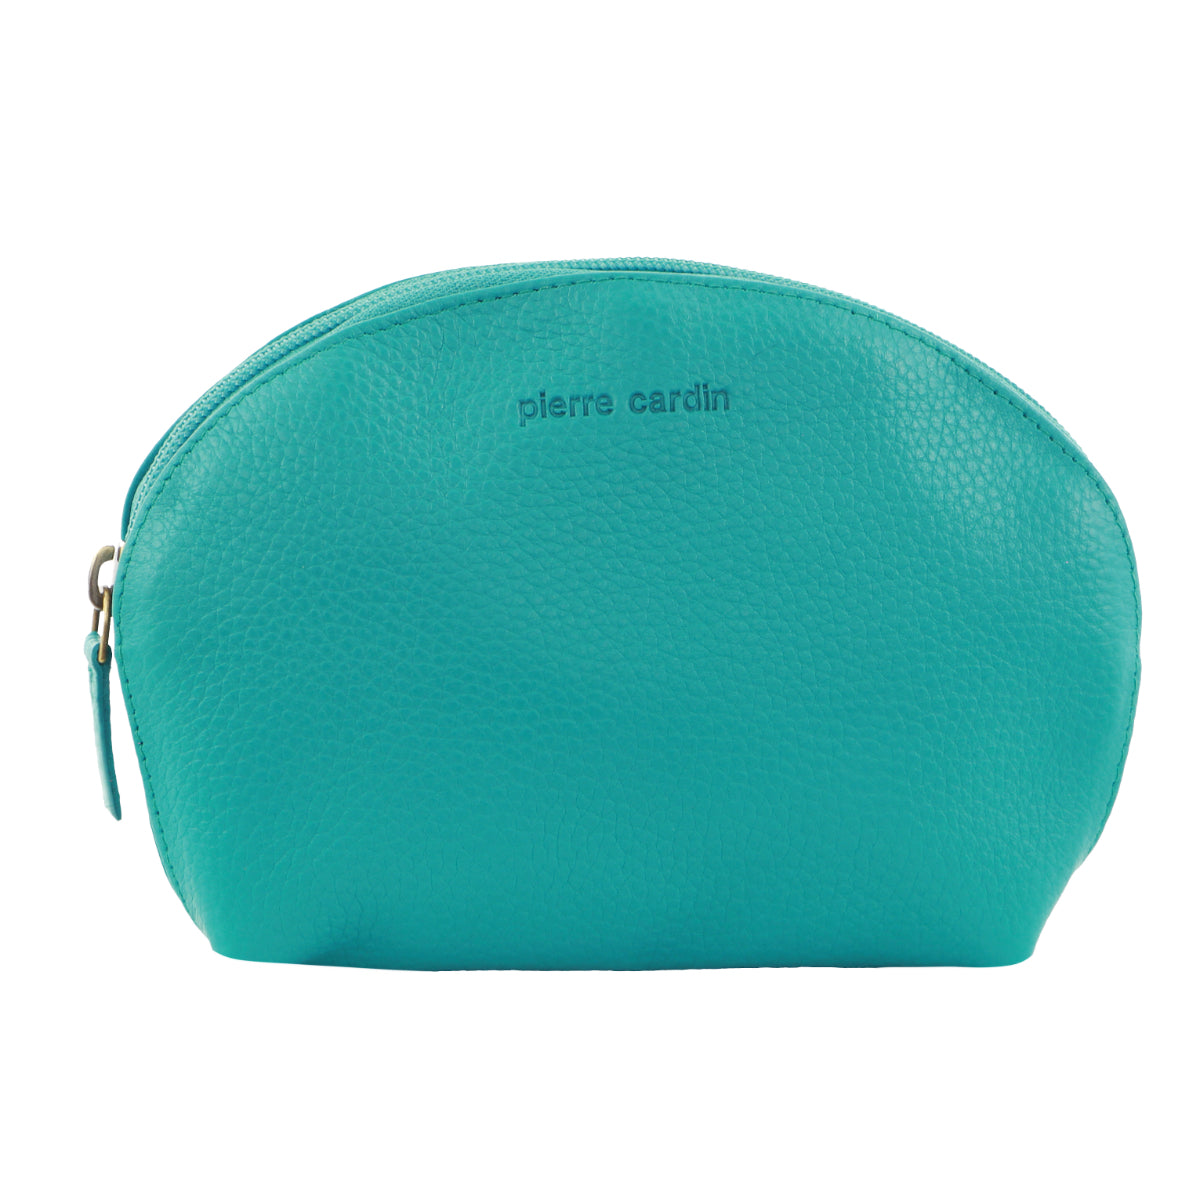 Pierre Cardin Leather Ladies Coin Purse in Turquoise